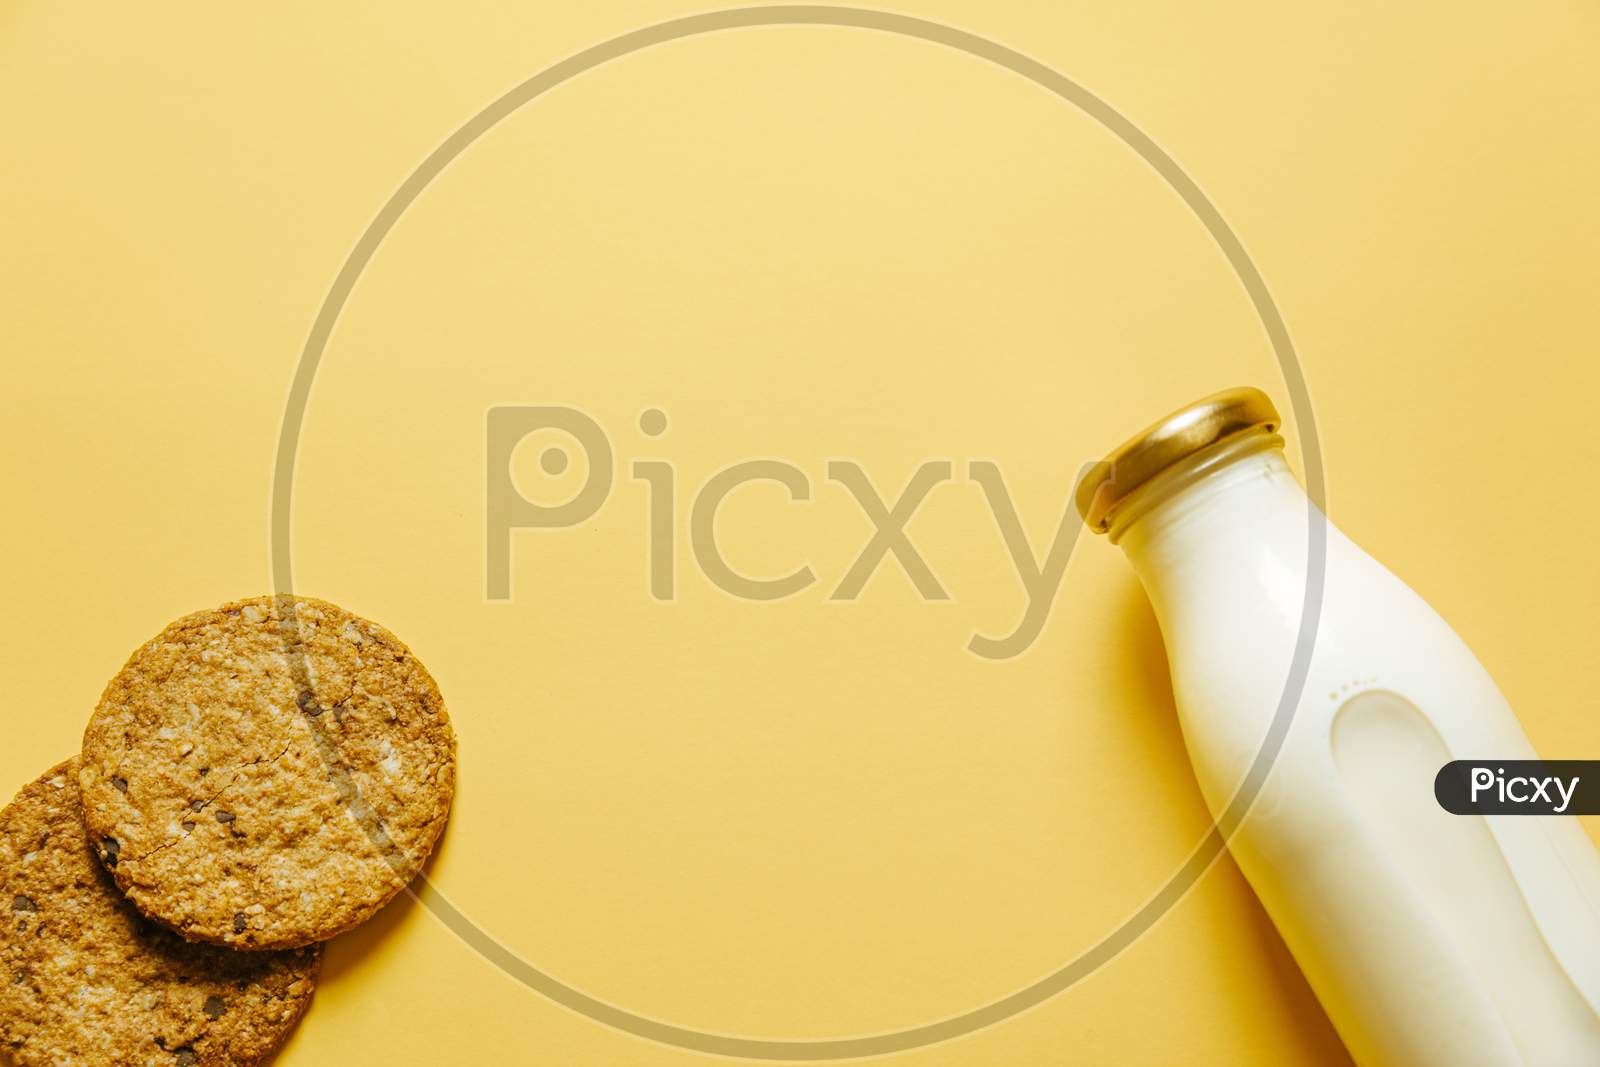 Two Cookies And A Bottle Of Milk Over A Yellow Wallpaper